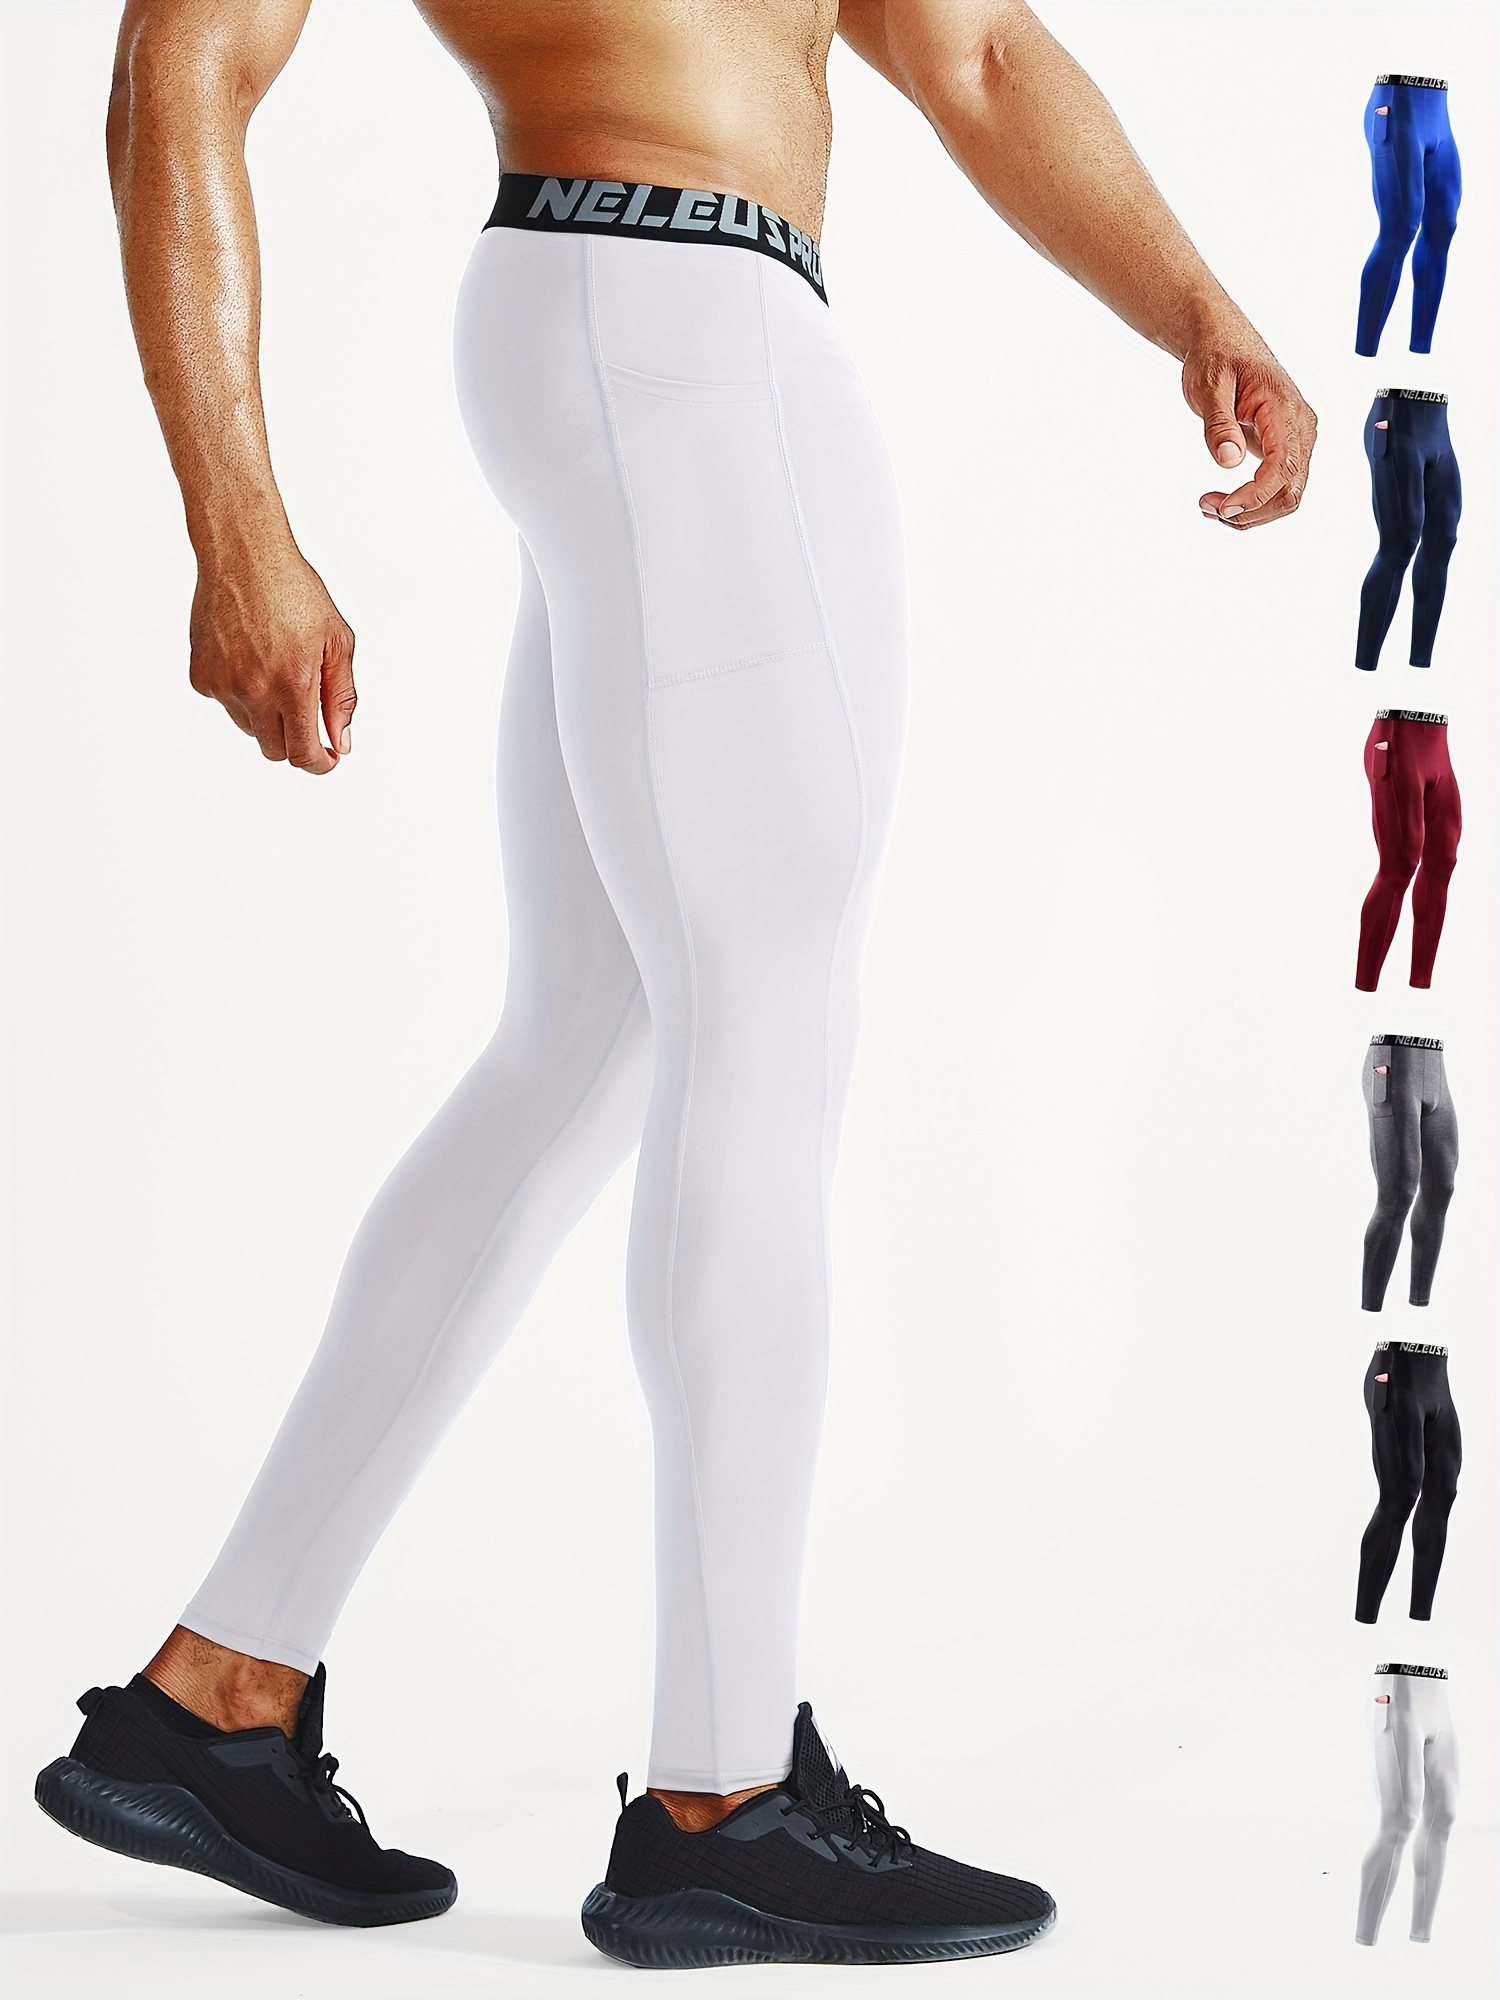 Velvet Pocket PRO Tight Stretch Running Pants For Men Autumn/Winter  Compression Mens Running Tights For Athletic Jogging And Training From  Kavin4, $14.12